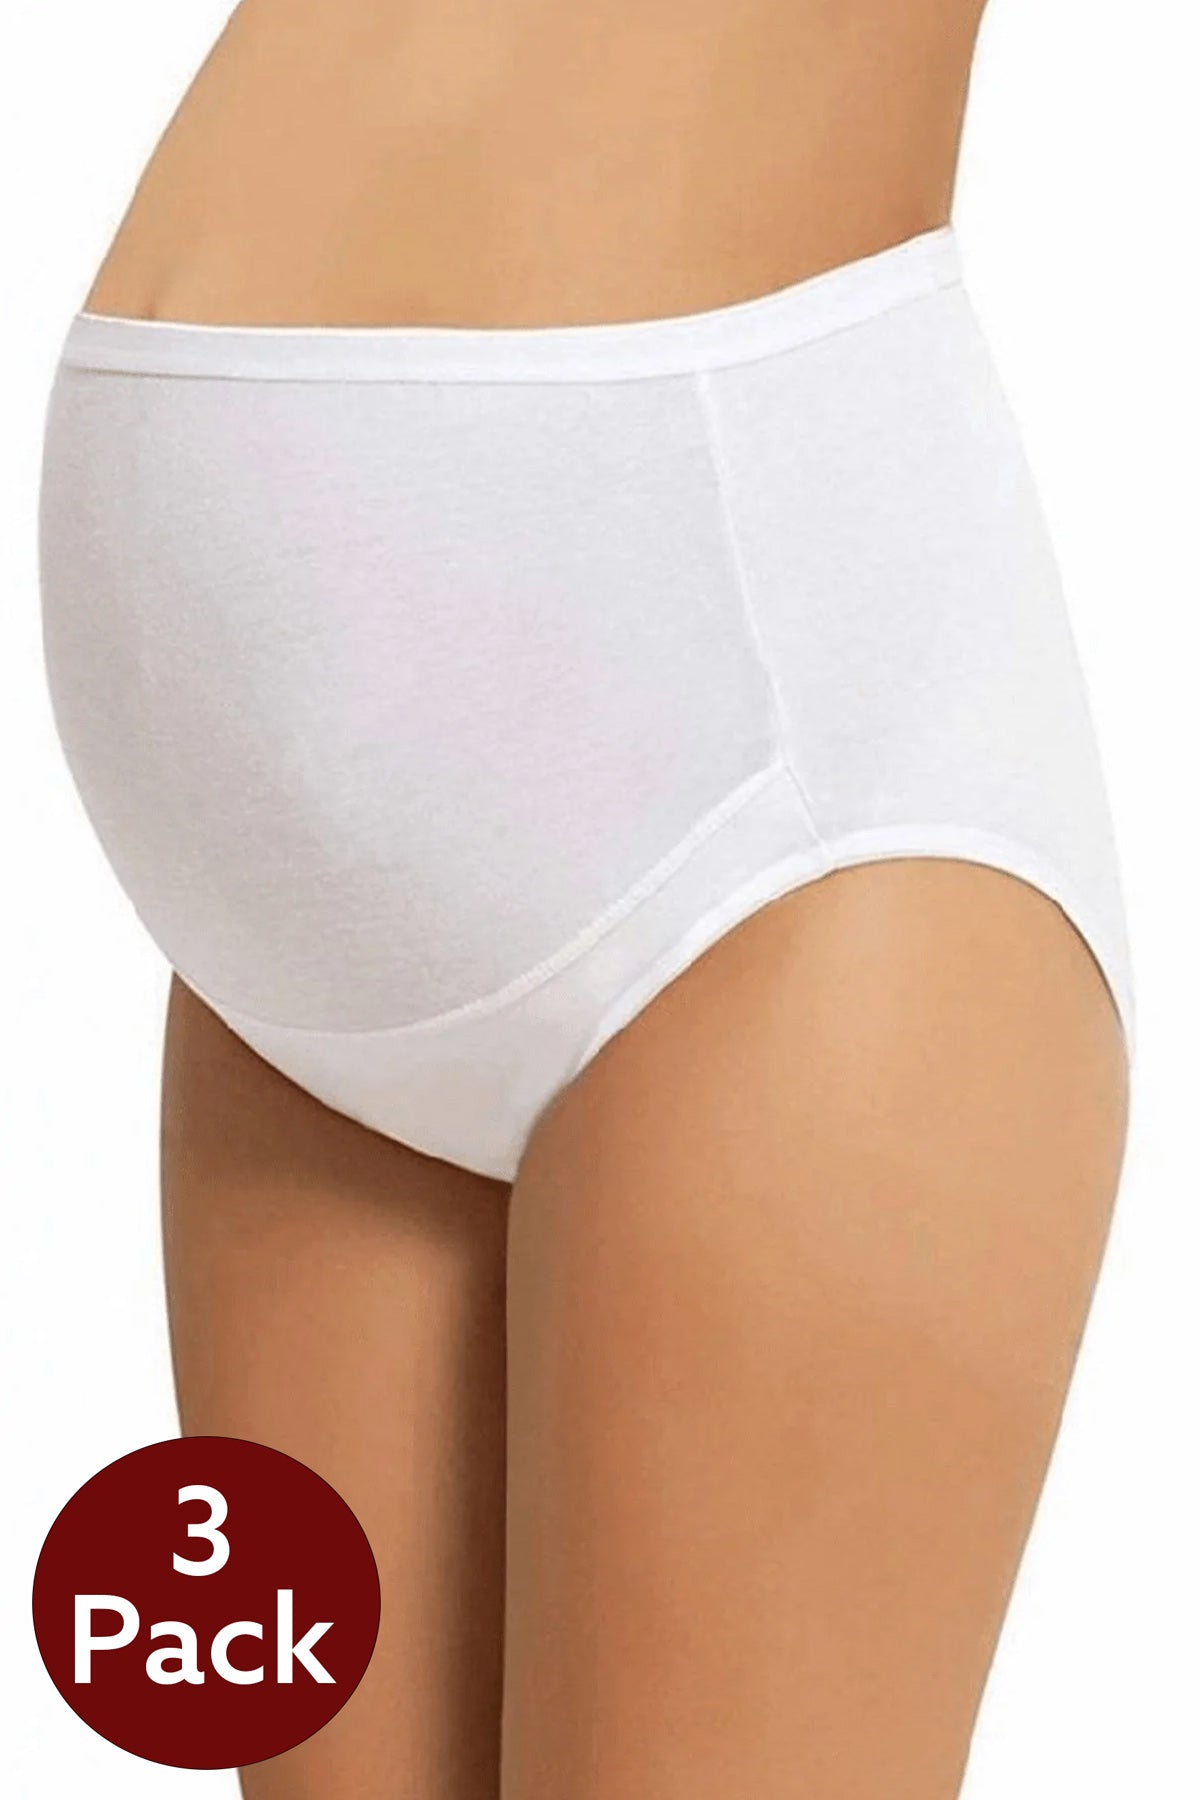 Shopymommy 1003 3-Pack Cotton Maternity Panties White